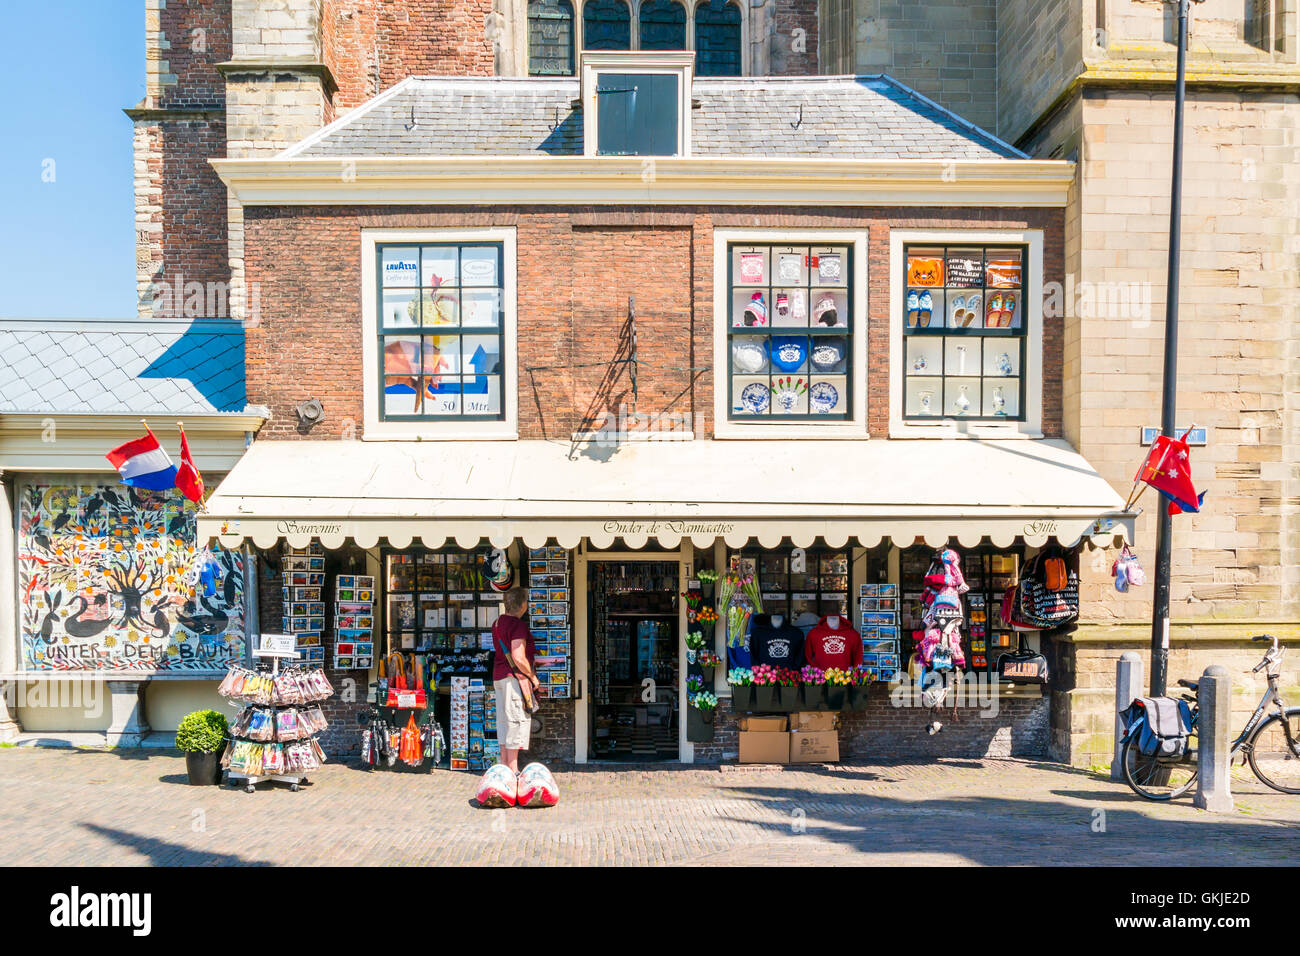 Souvenir gift shop in Lepelstraat near Grote Markt market square in old town of Haarlem, Holland, Netherlands Stock Photo